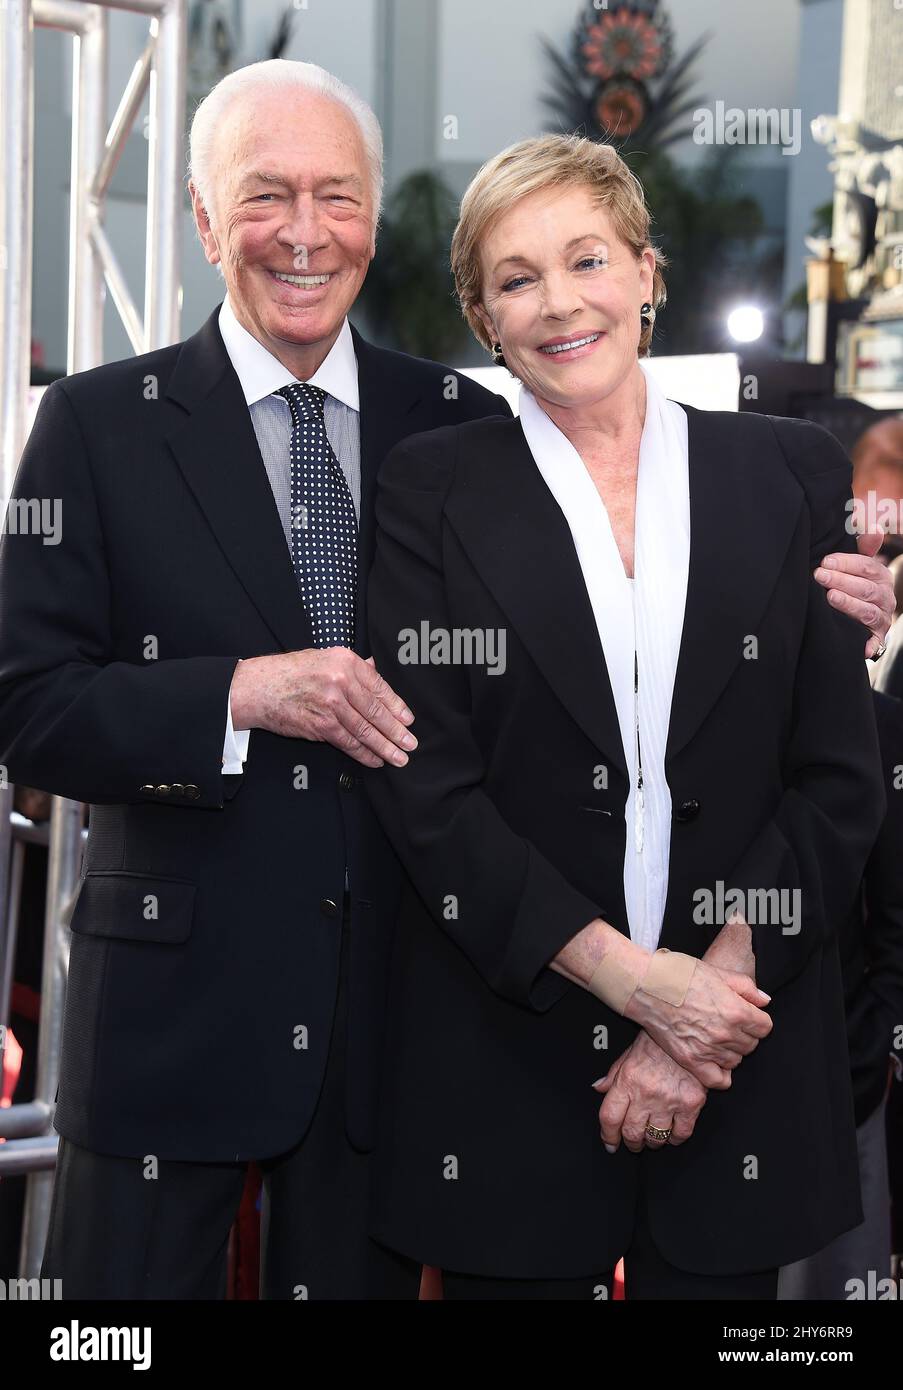 Christopher Plummer and Julie Andrews attending The 50th Anniversary screening of 'The Sound of Music' presented as the Opening Night Gala of the 2015 TCM Classic Film Festival held at TCL Chinese Theatre in Los Angeles, California. Stock Photo